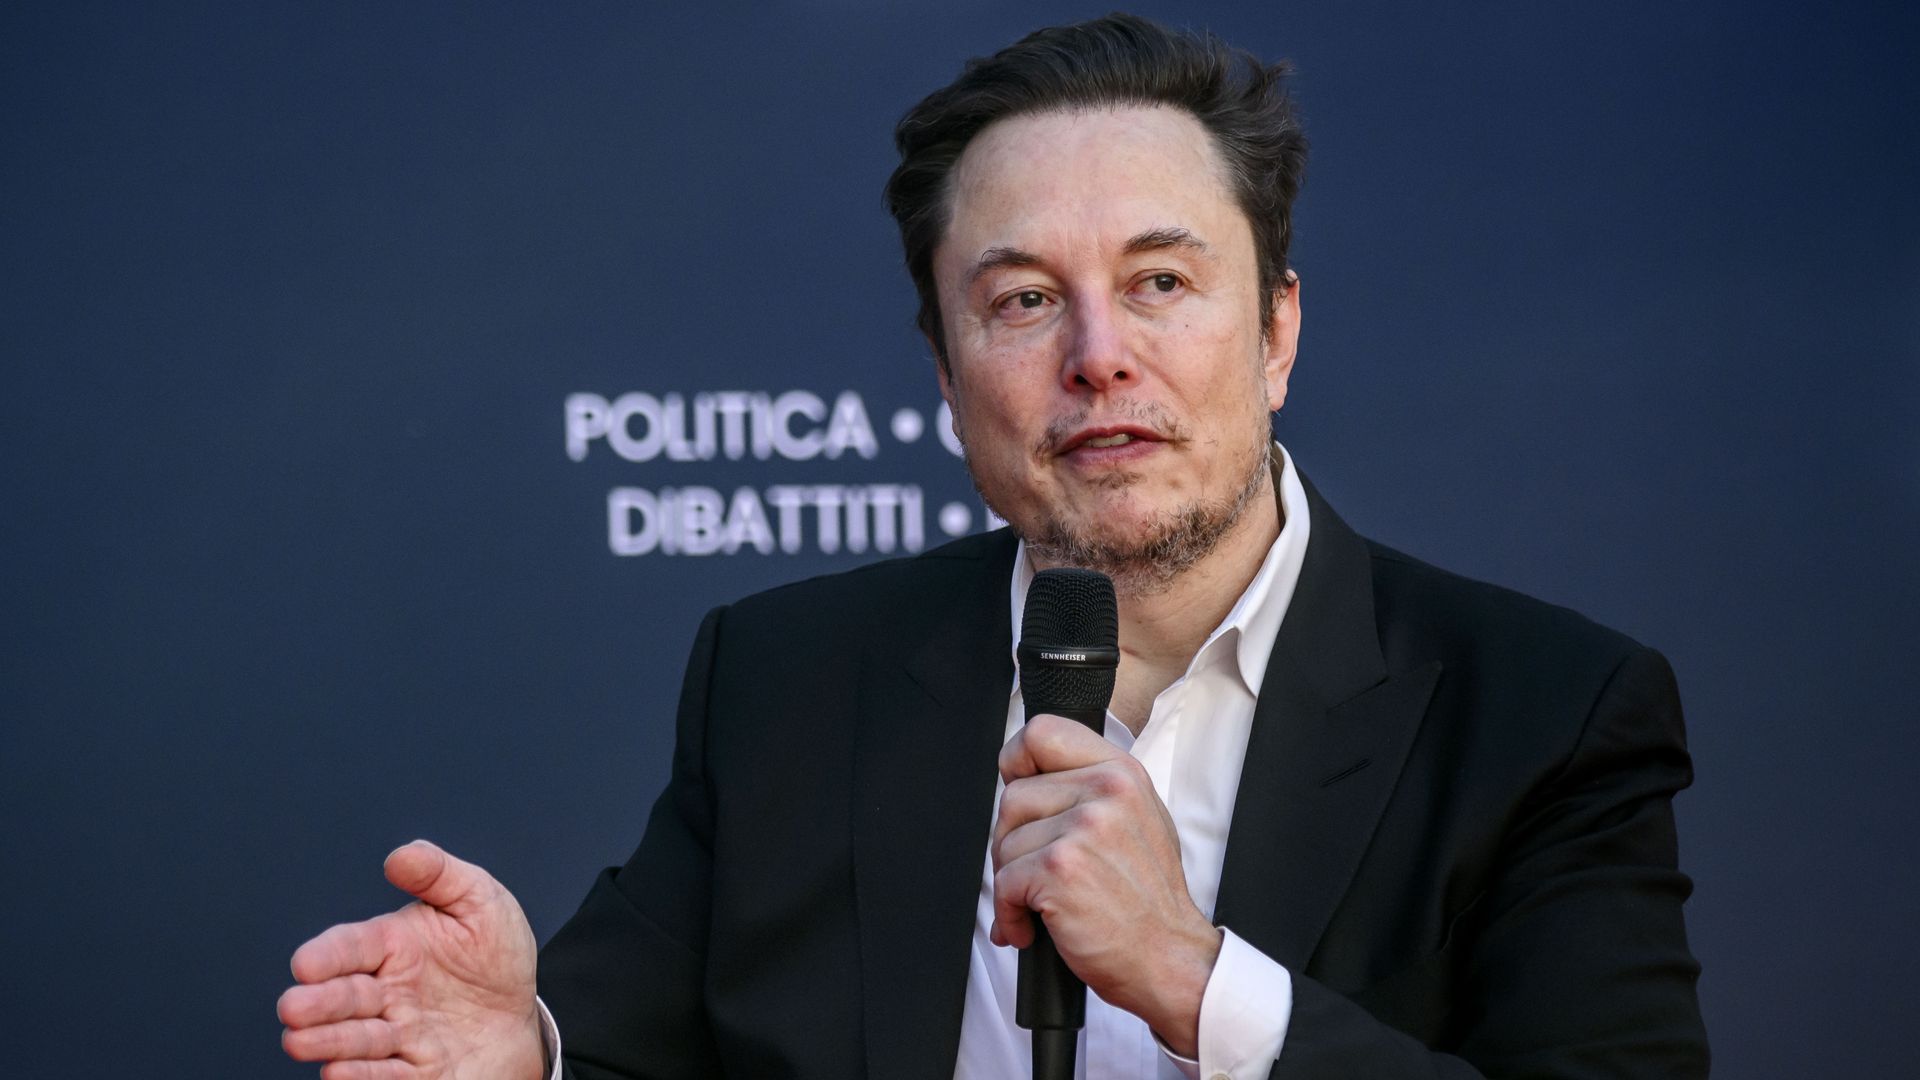 Elon Musk holds microphone while speaking at a convention